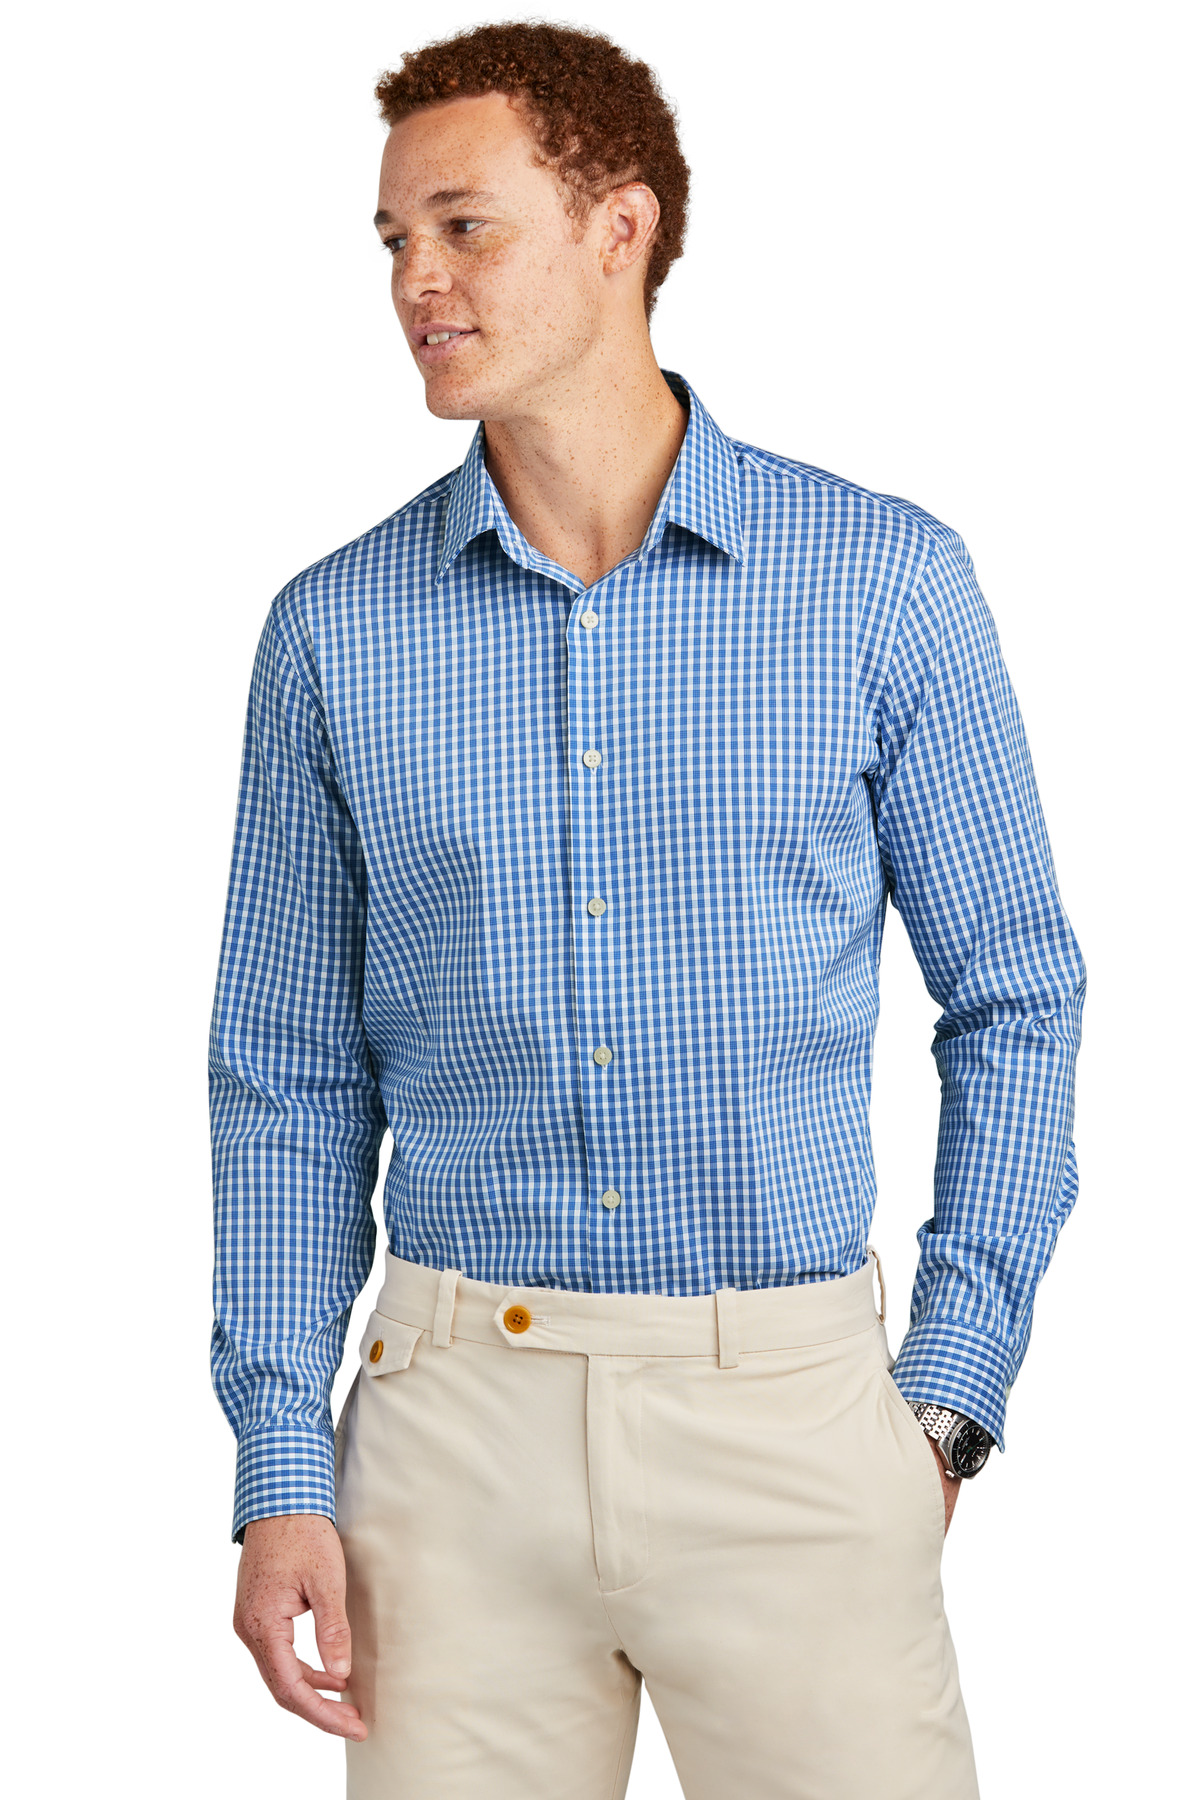 Brooks Brothers Tech Stretch Patterned Shirt-Brooks Brothers